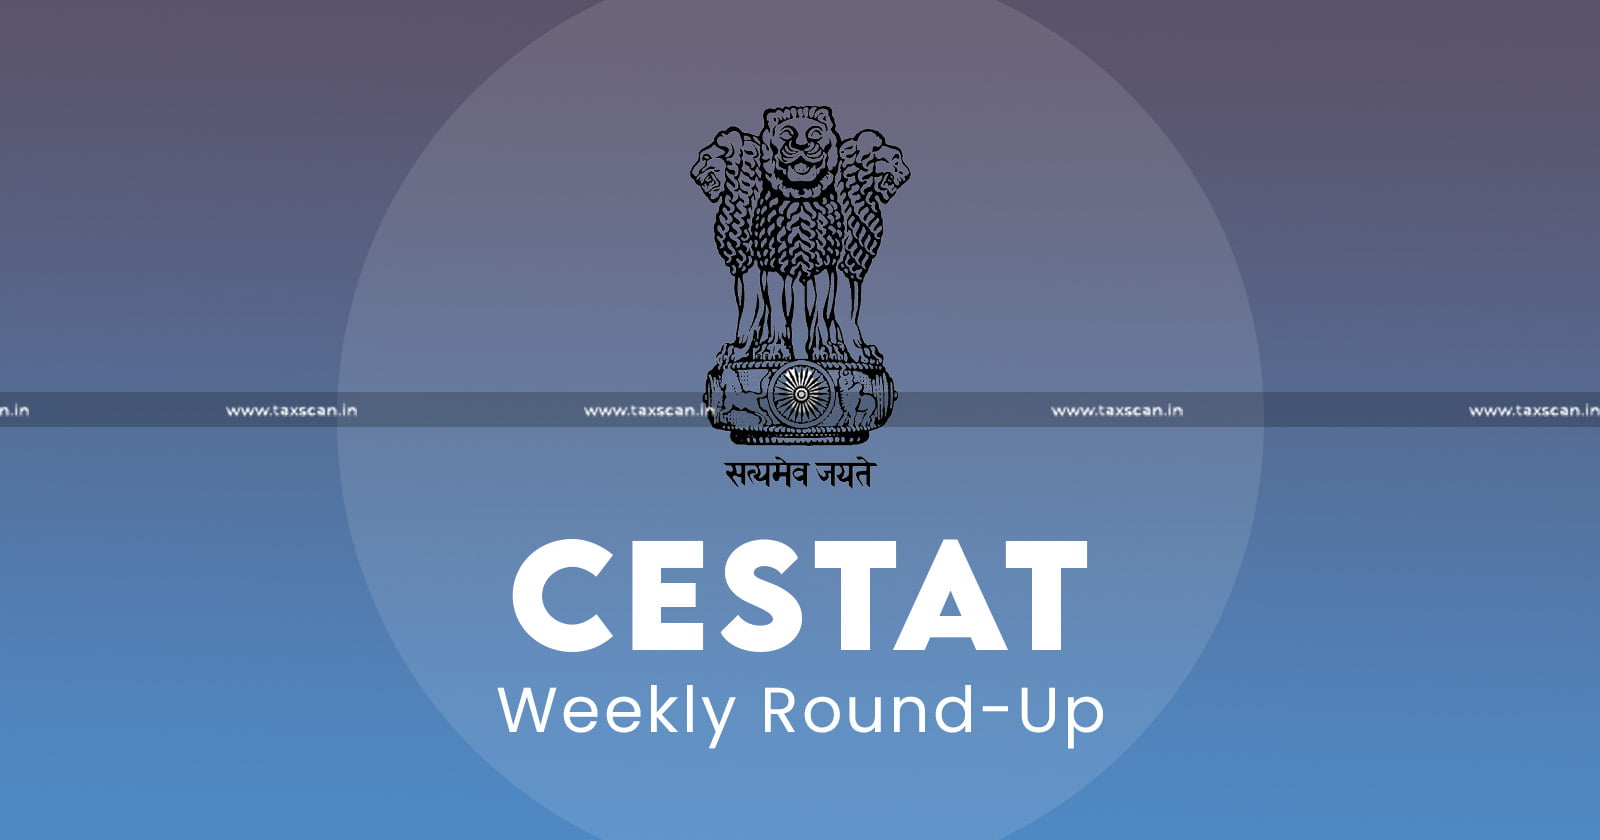 CESTAT - Weekly Round Up - Taxscan